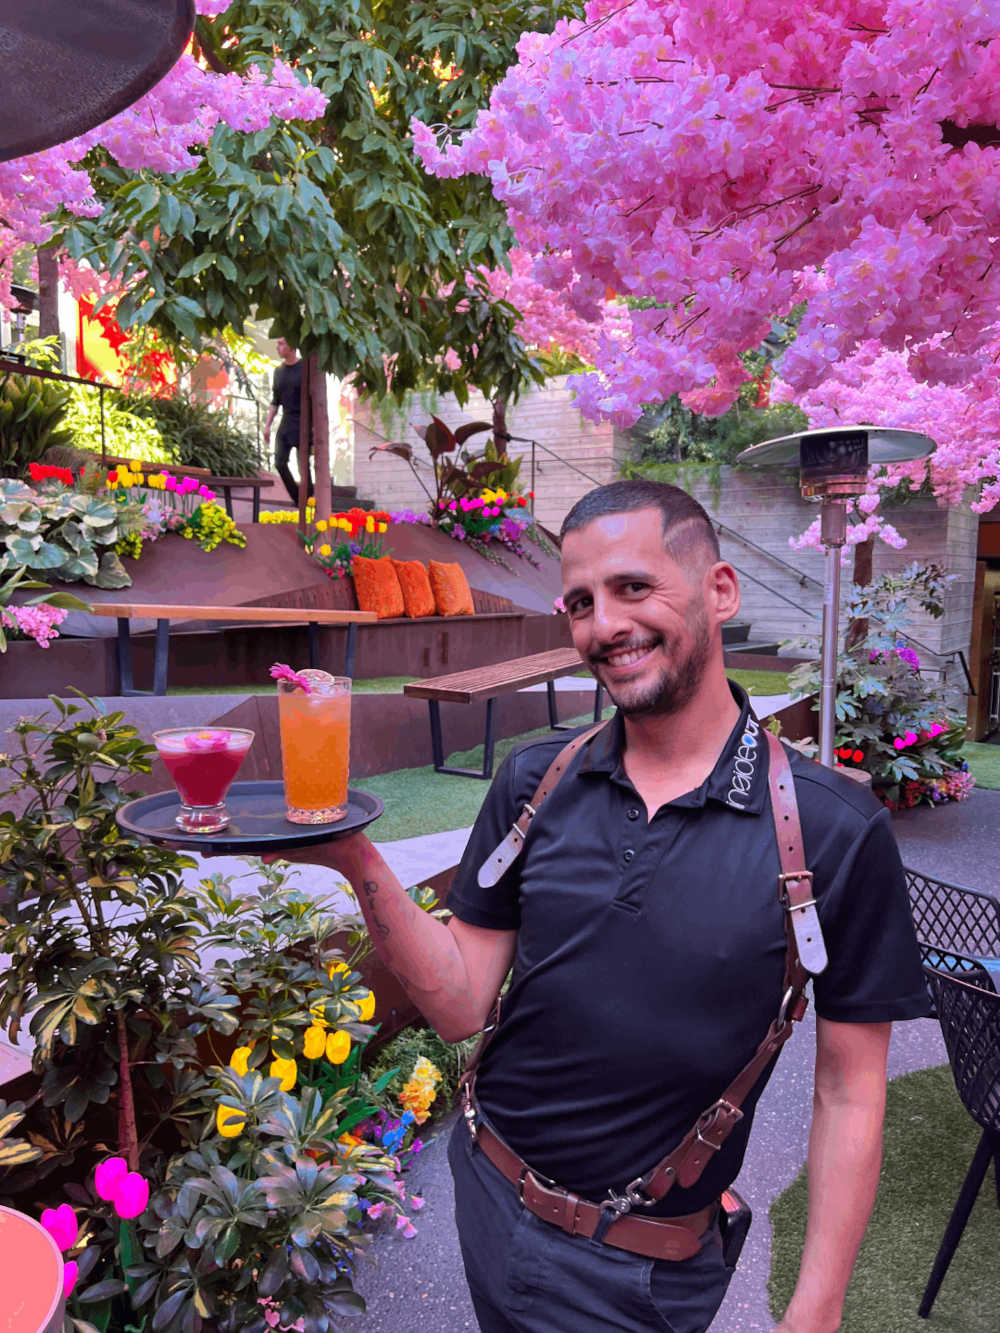 A person standing in a garden holding a tray with drinks